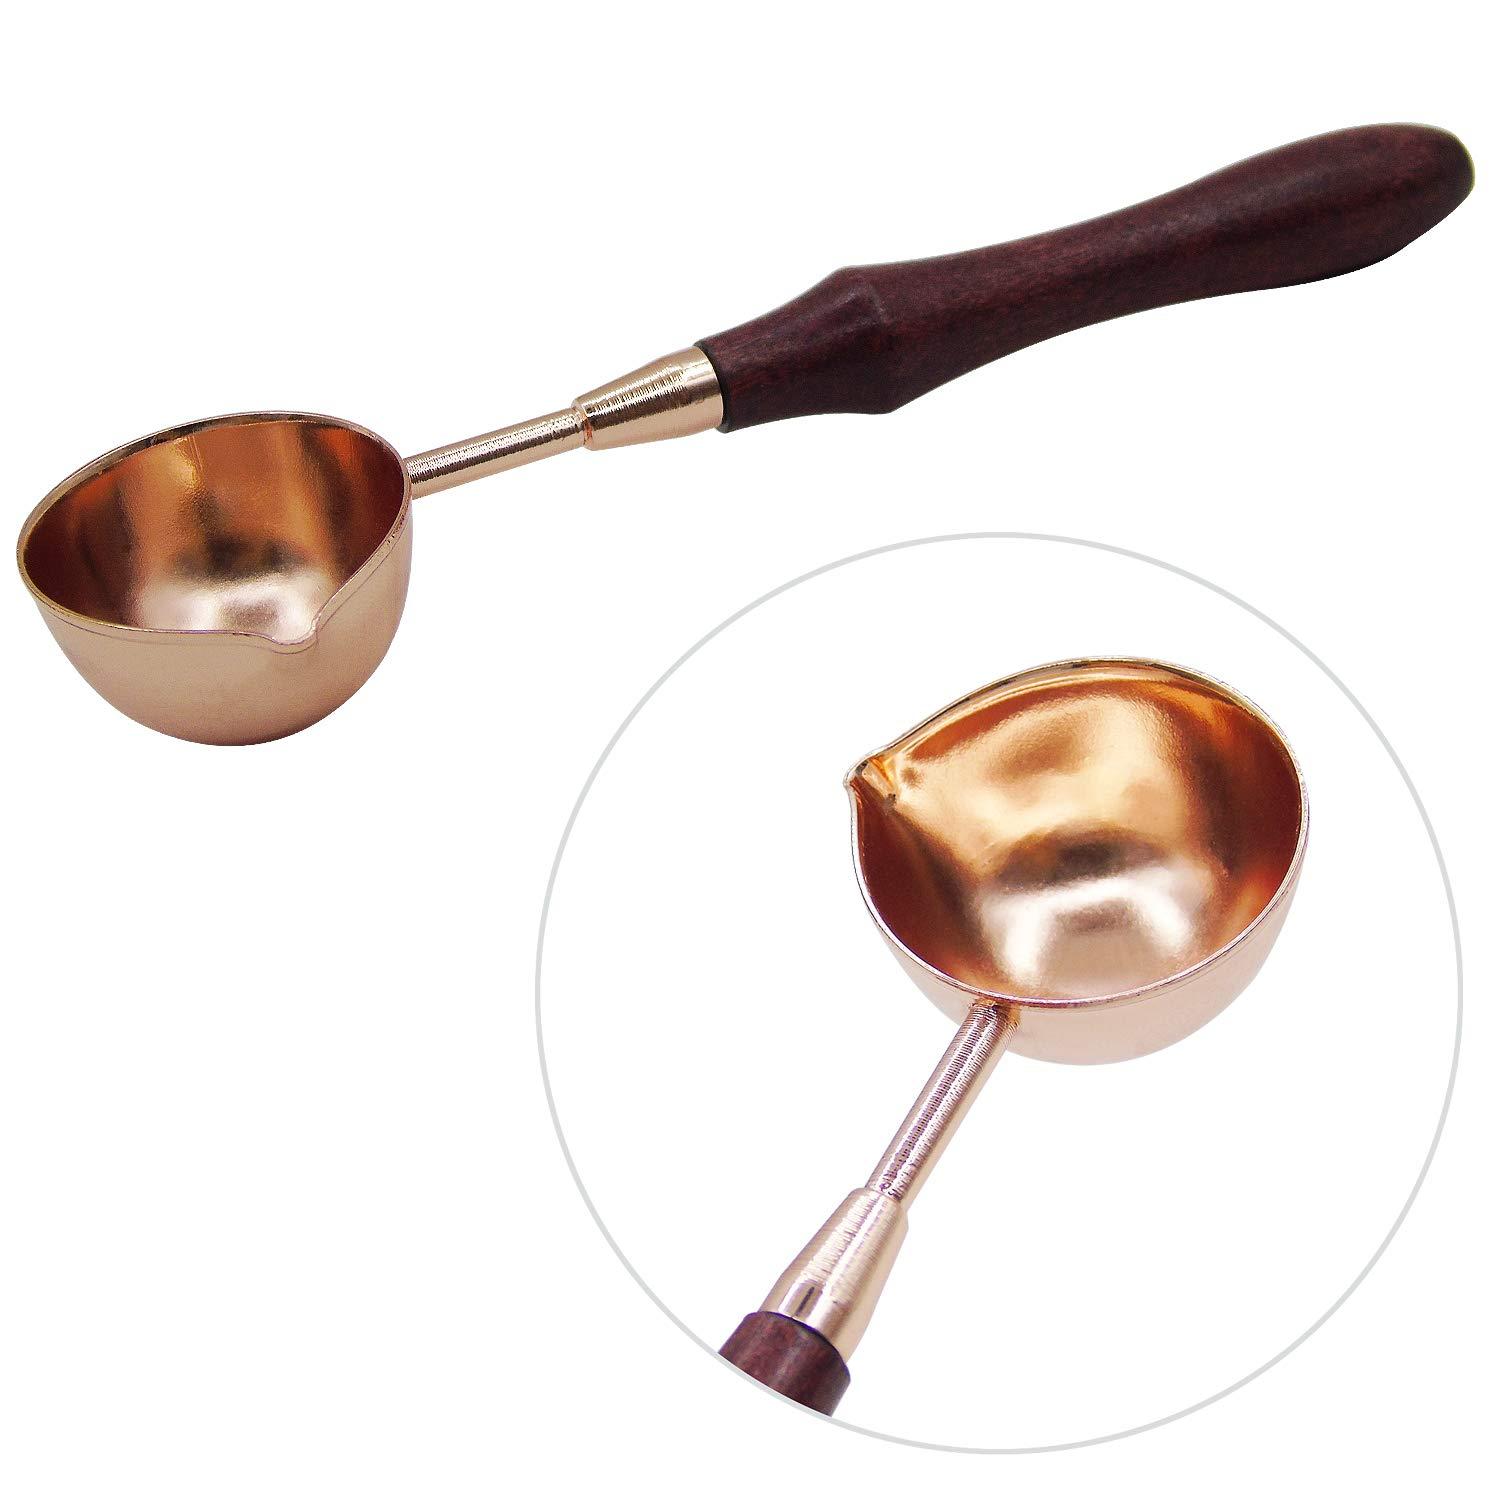 Shop Wax Melting Spoons, Ships from USA